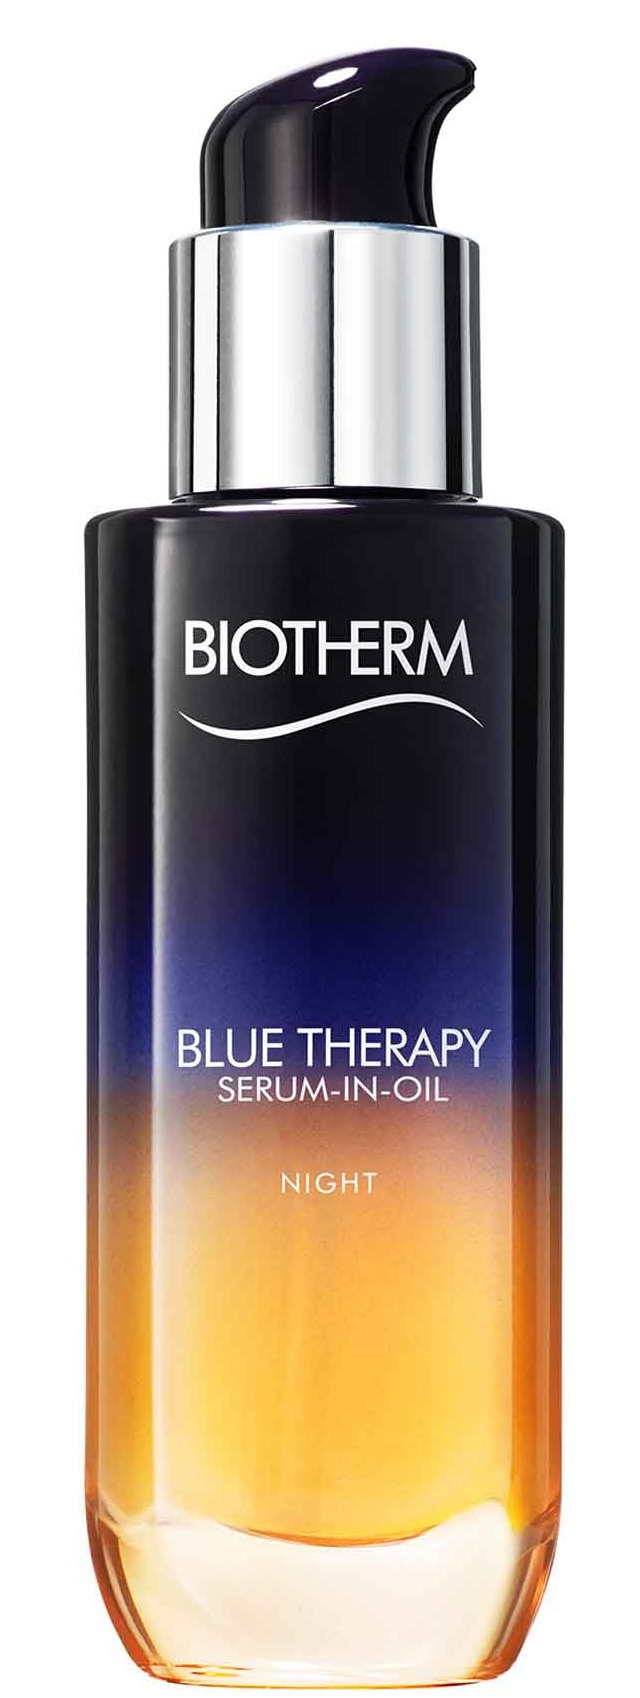 Biotherm Blue Therapy Serum In Oil Night